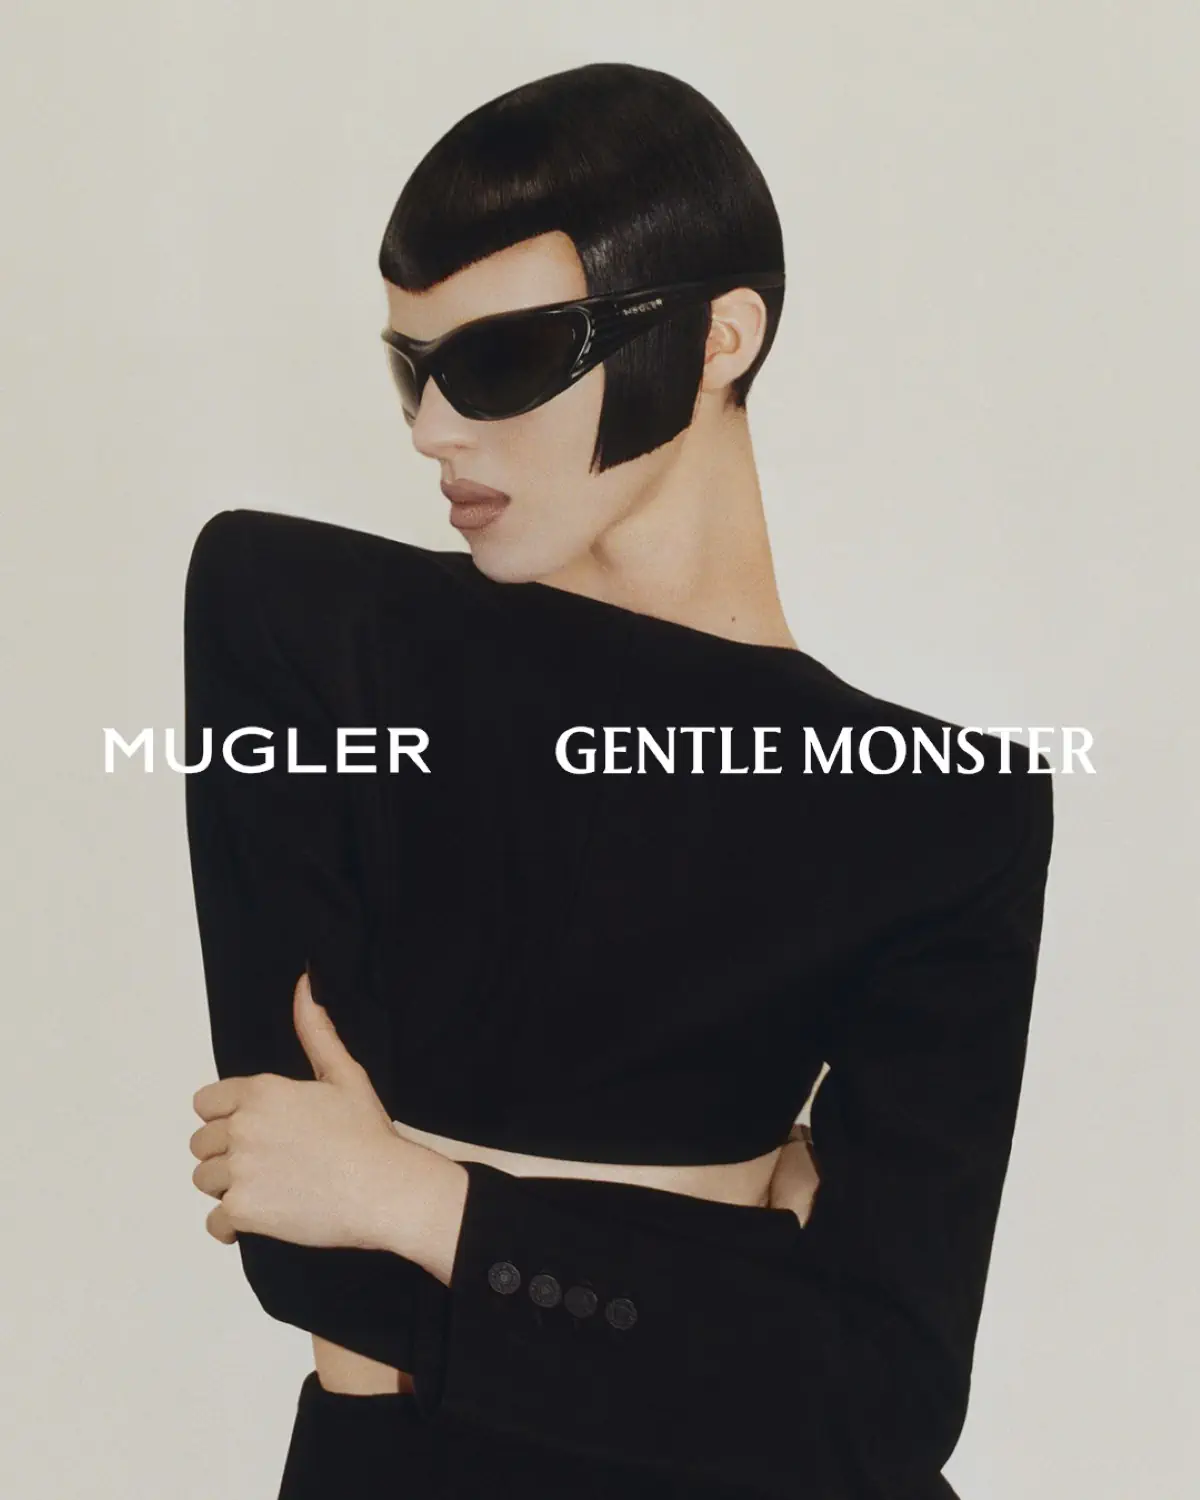 Mugler and Gentler Monster collaborate on a futuristic eyewear collection